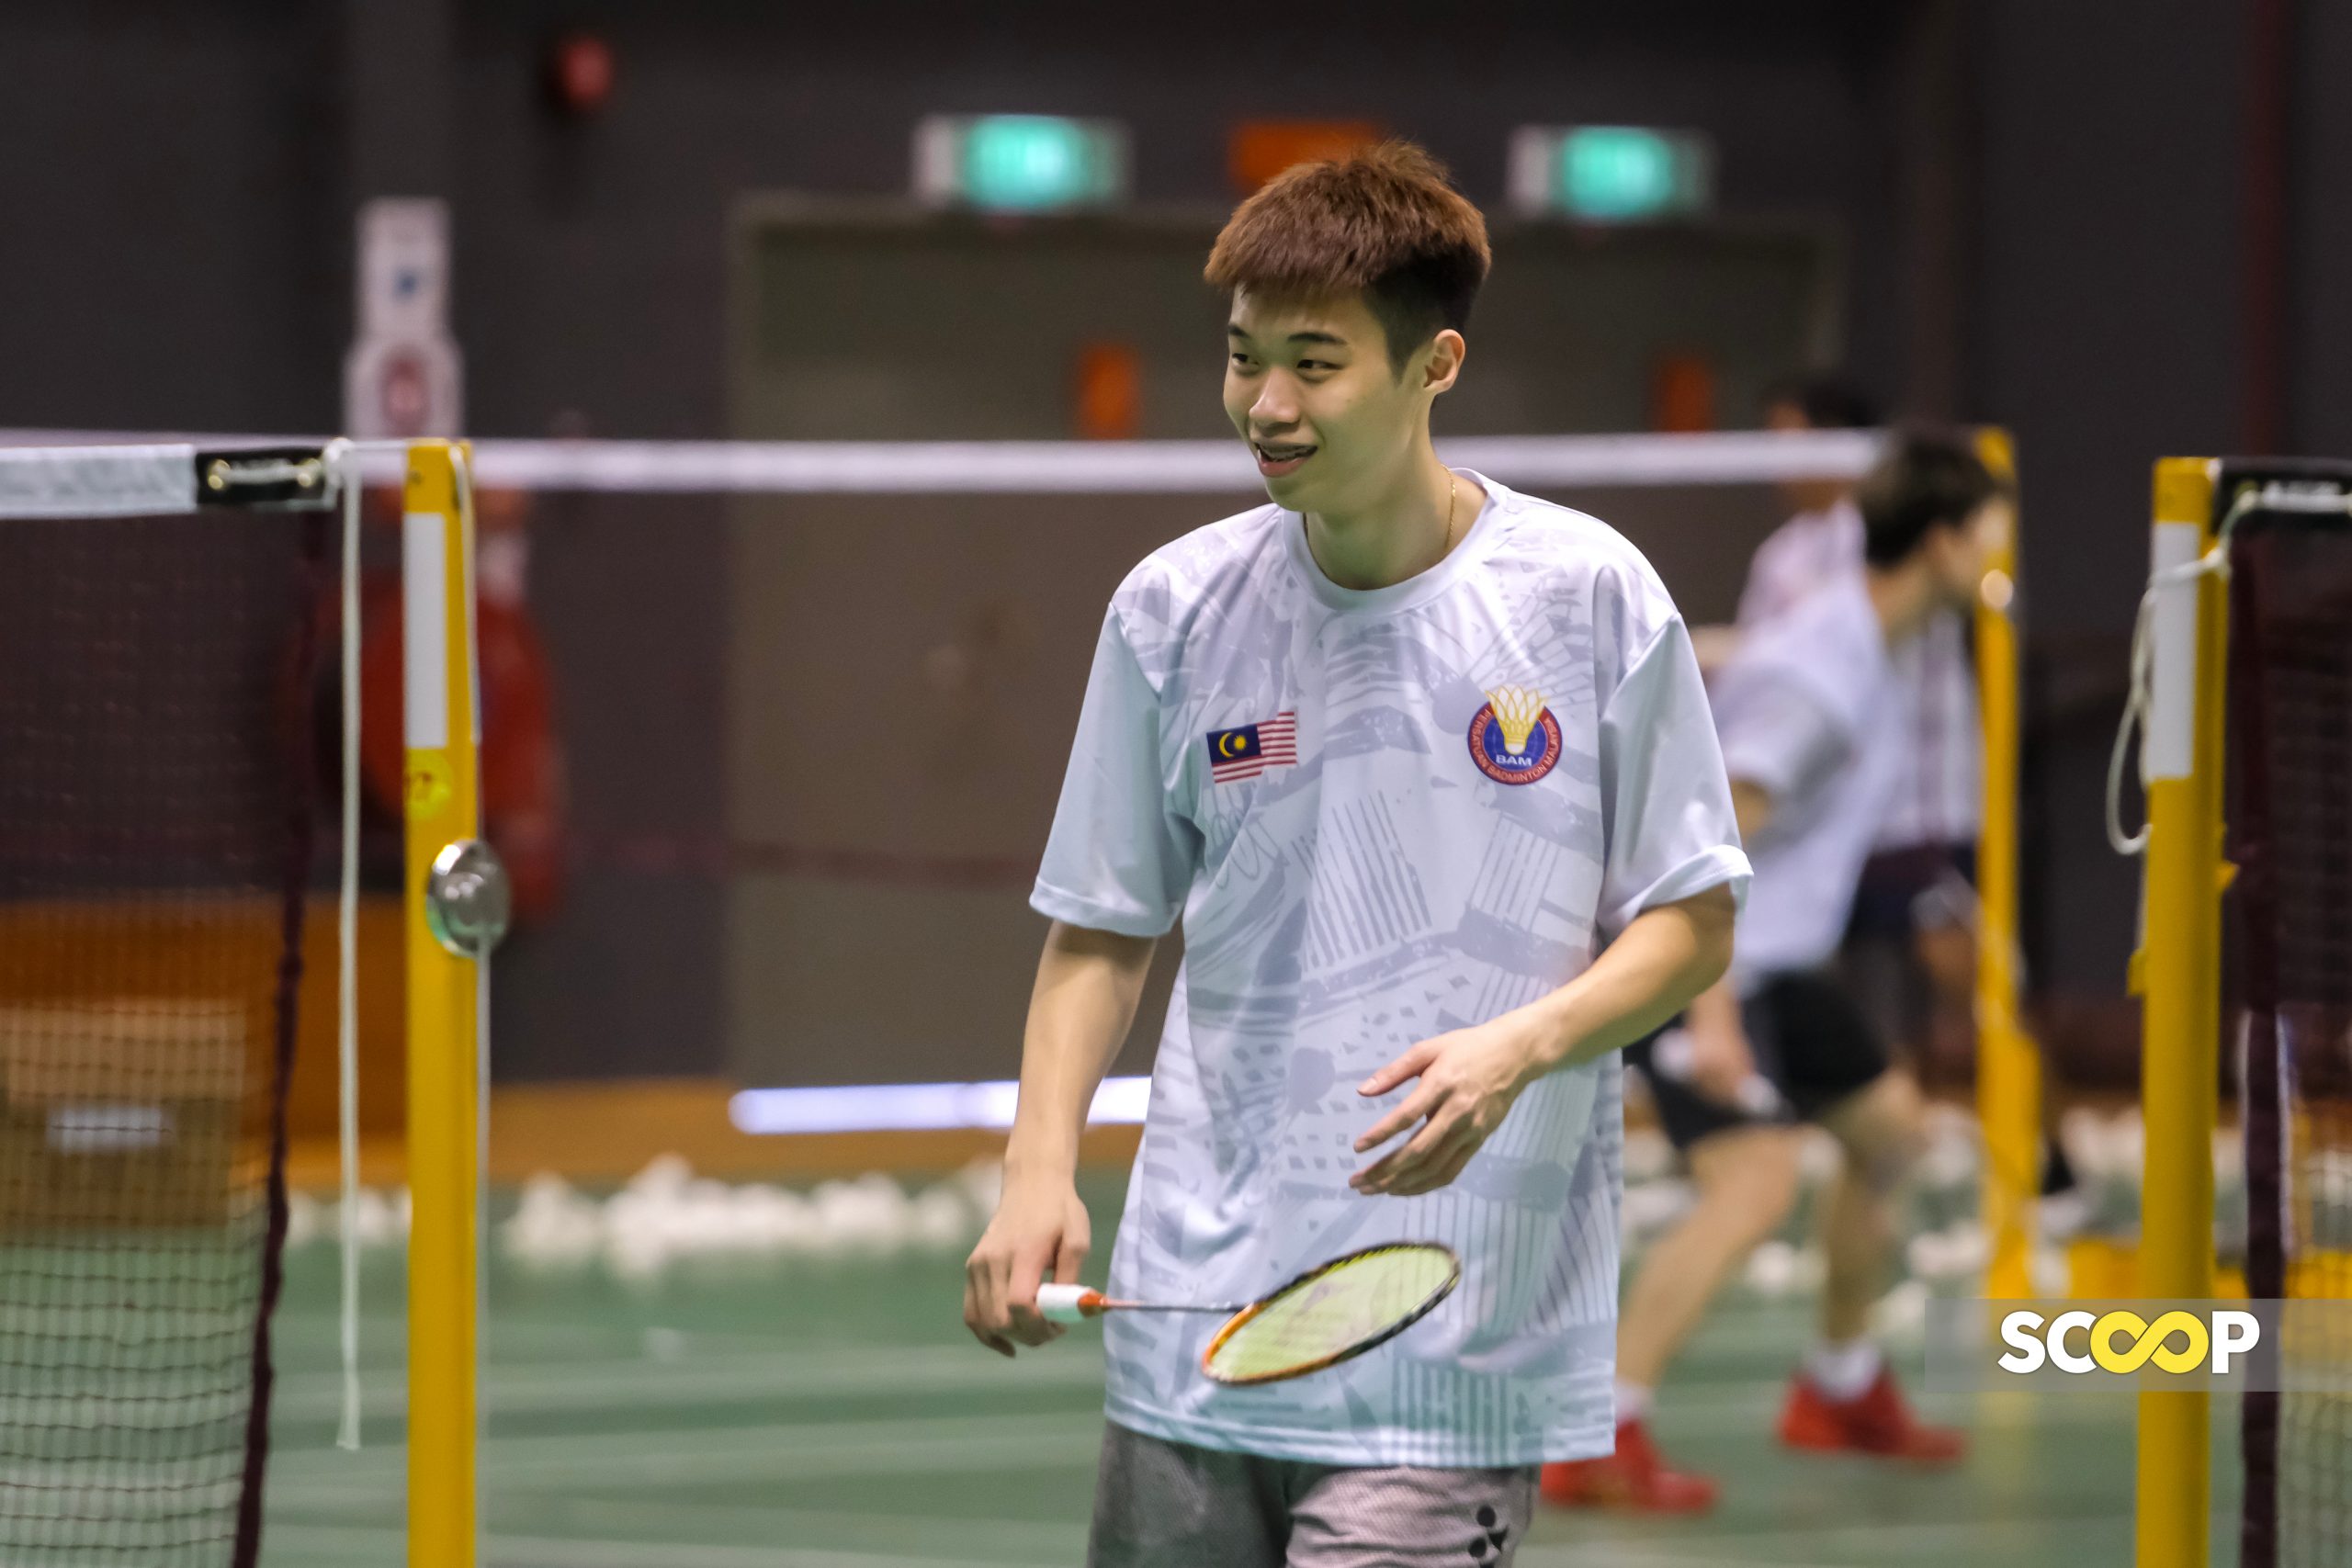 Asiad: Zii Jia to face Angus, Tze Yong to take on Kean Yew